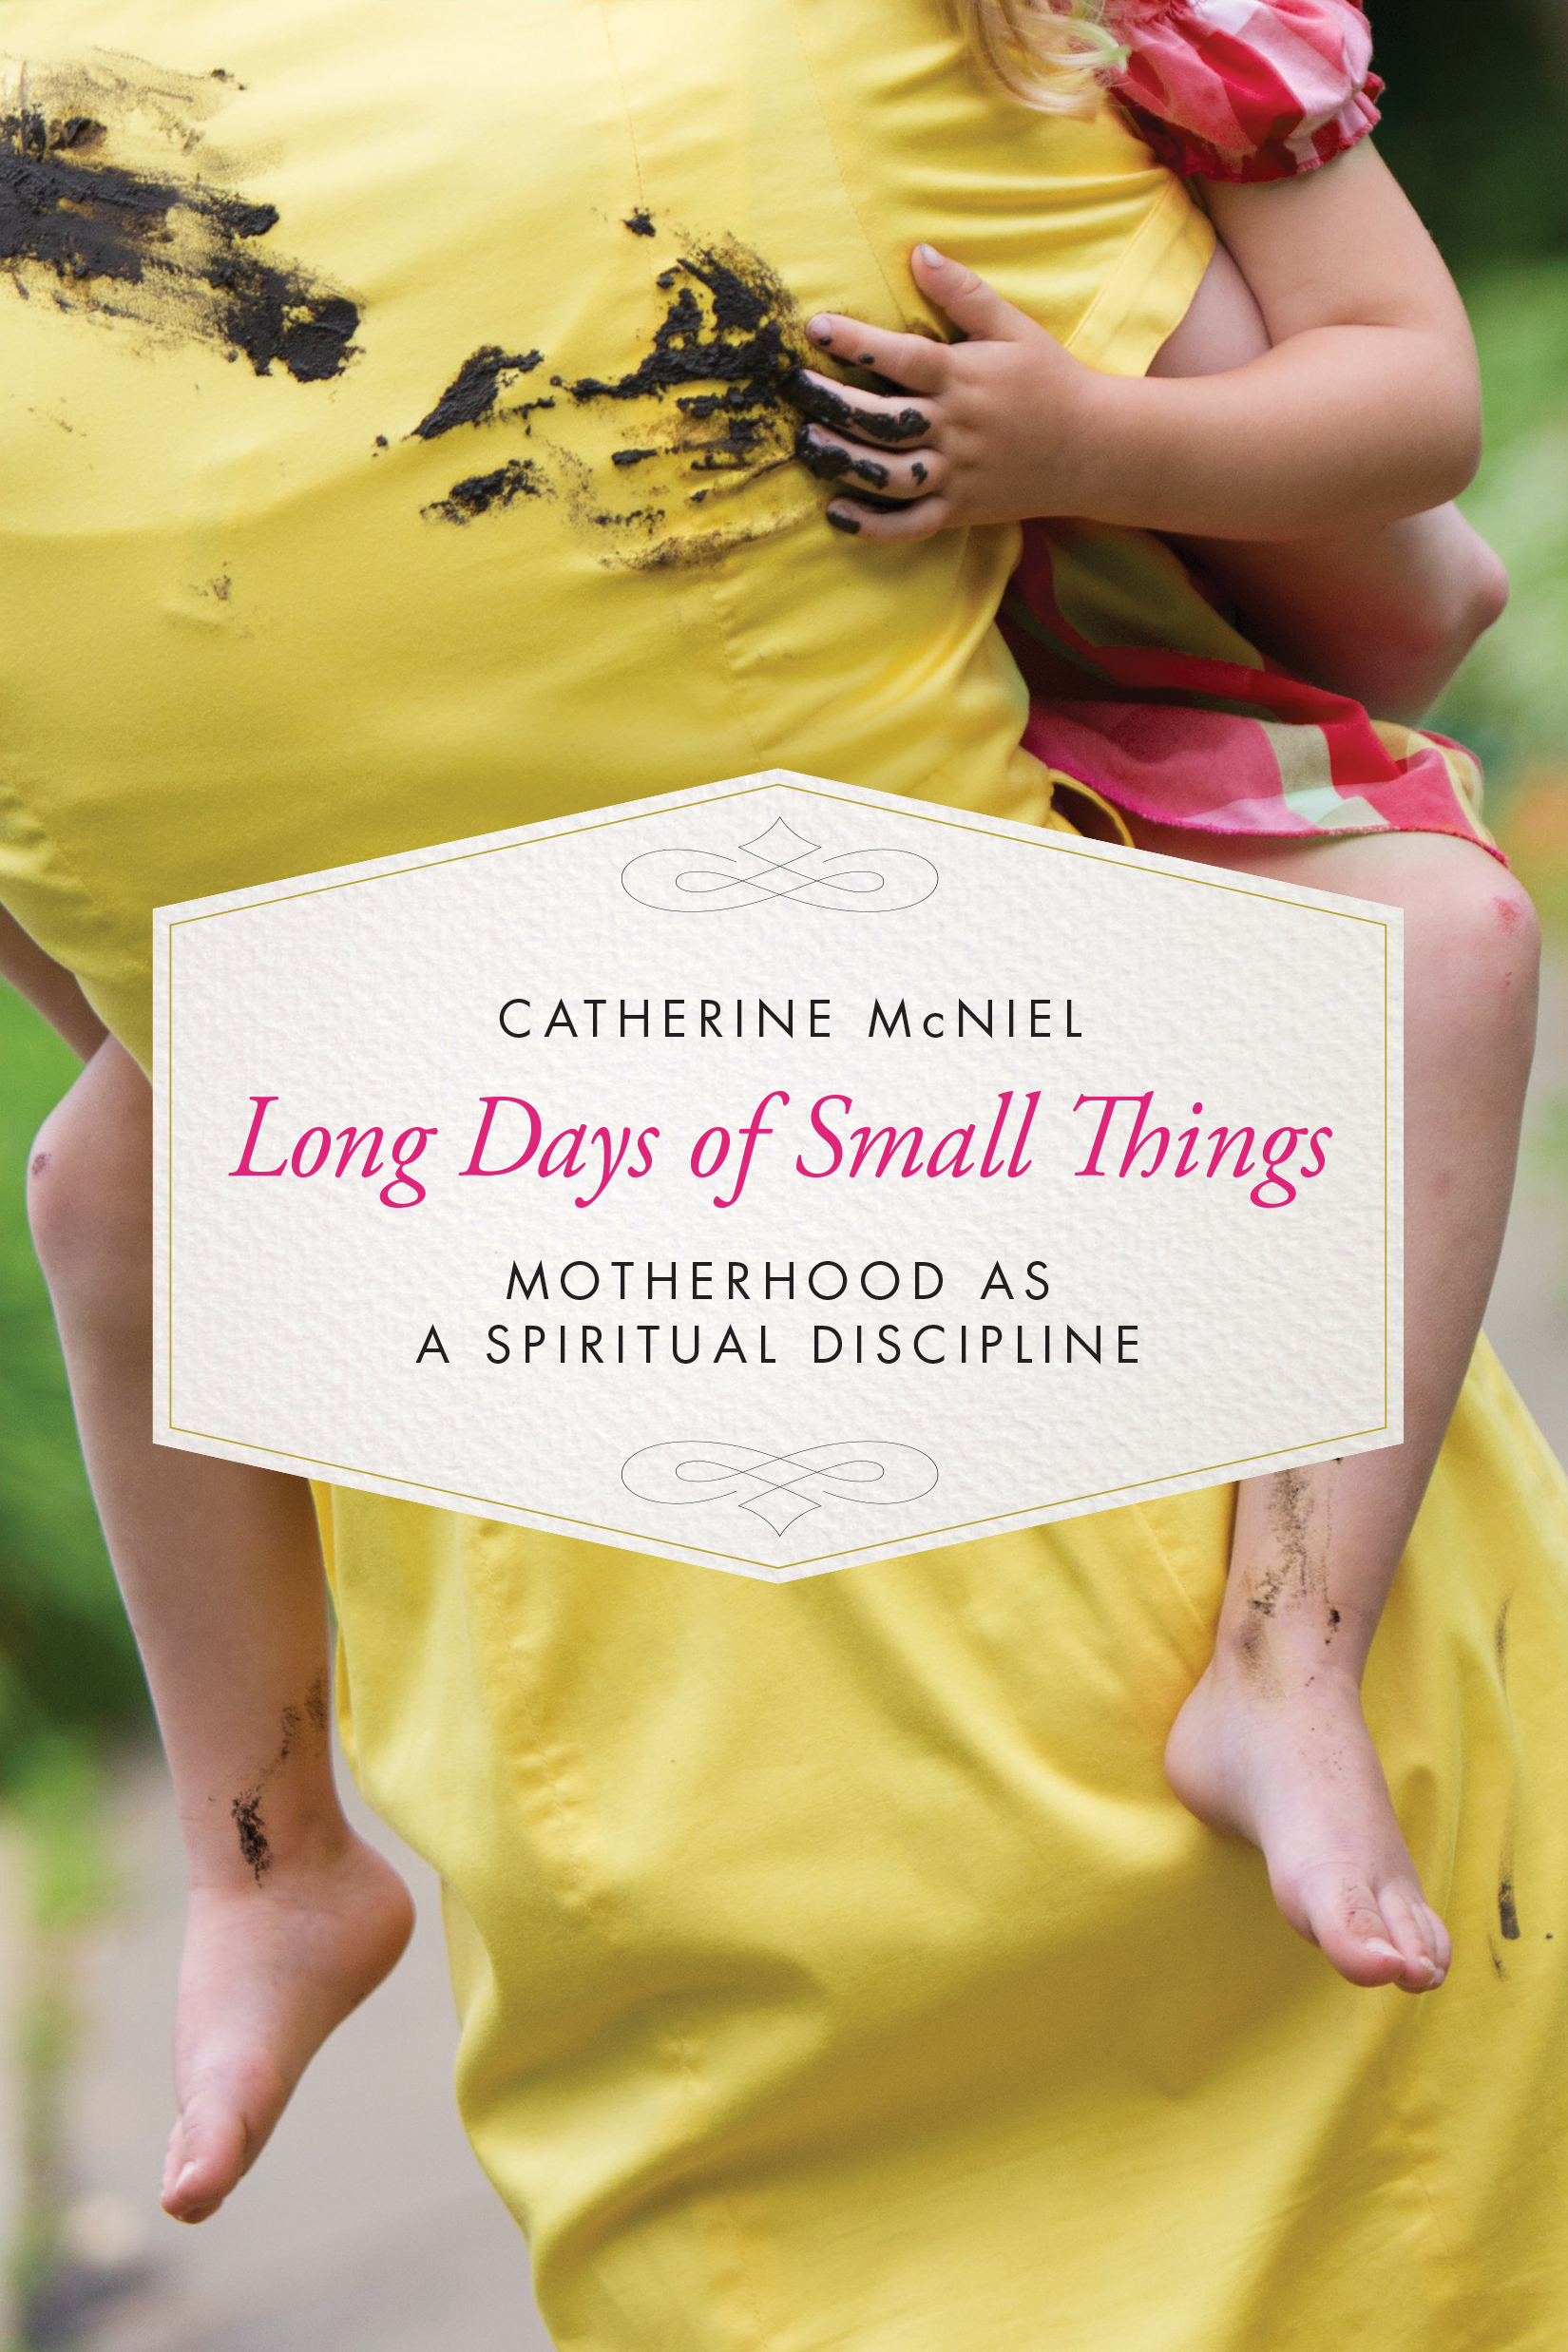 Interview with Author Catherine McNiel (& a giveaway)